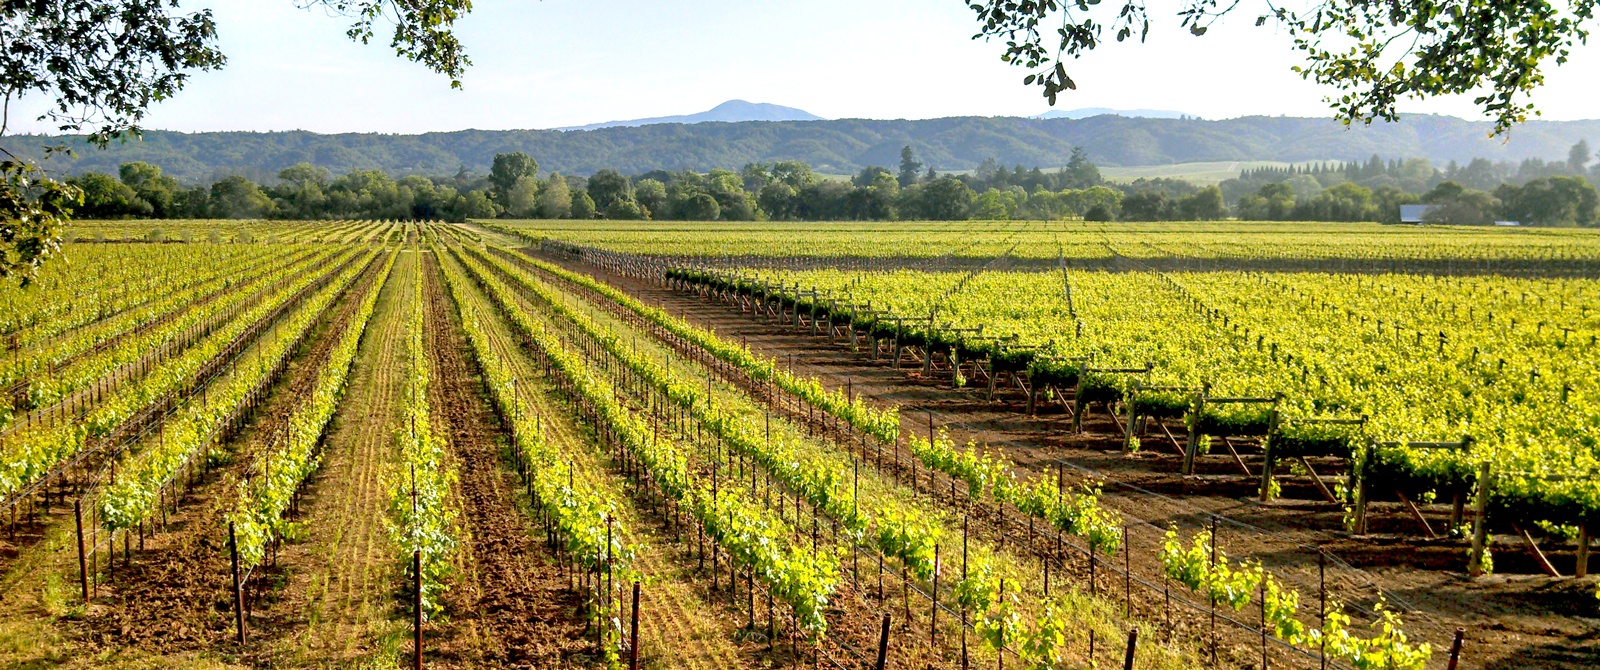 Ride along vineyards on a California Wine Country bike tour